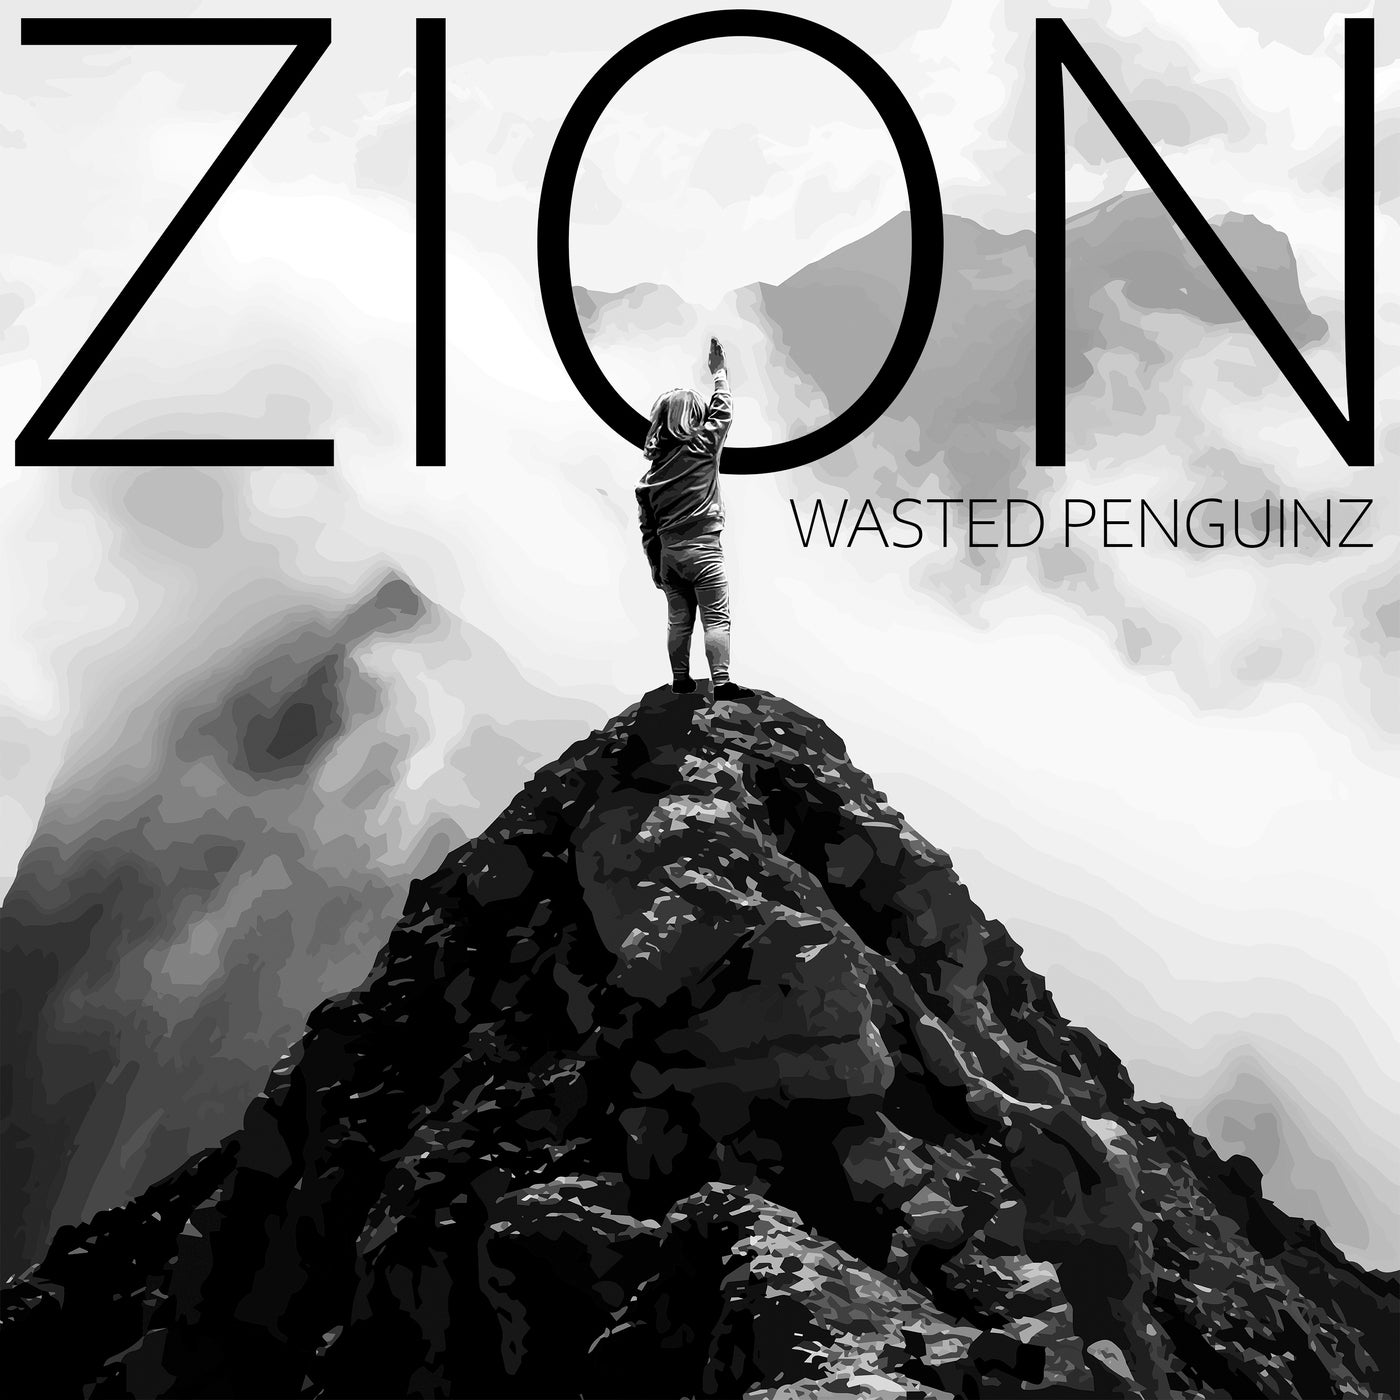 Cover - Wasted Penguinz - Zion (Original Mix)